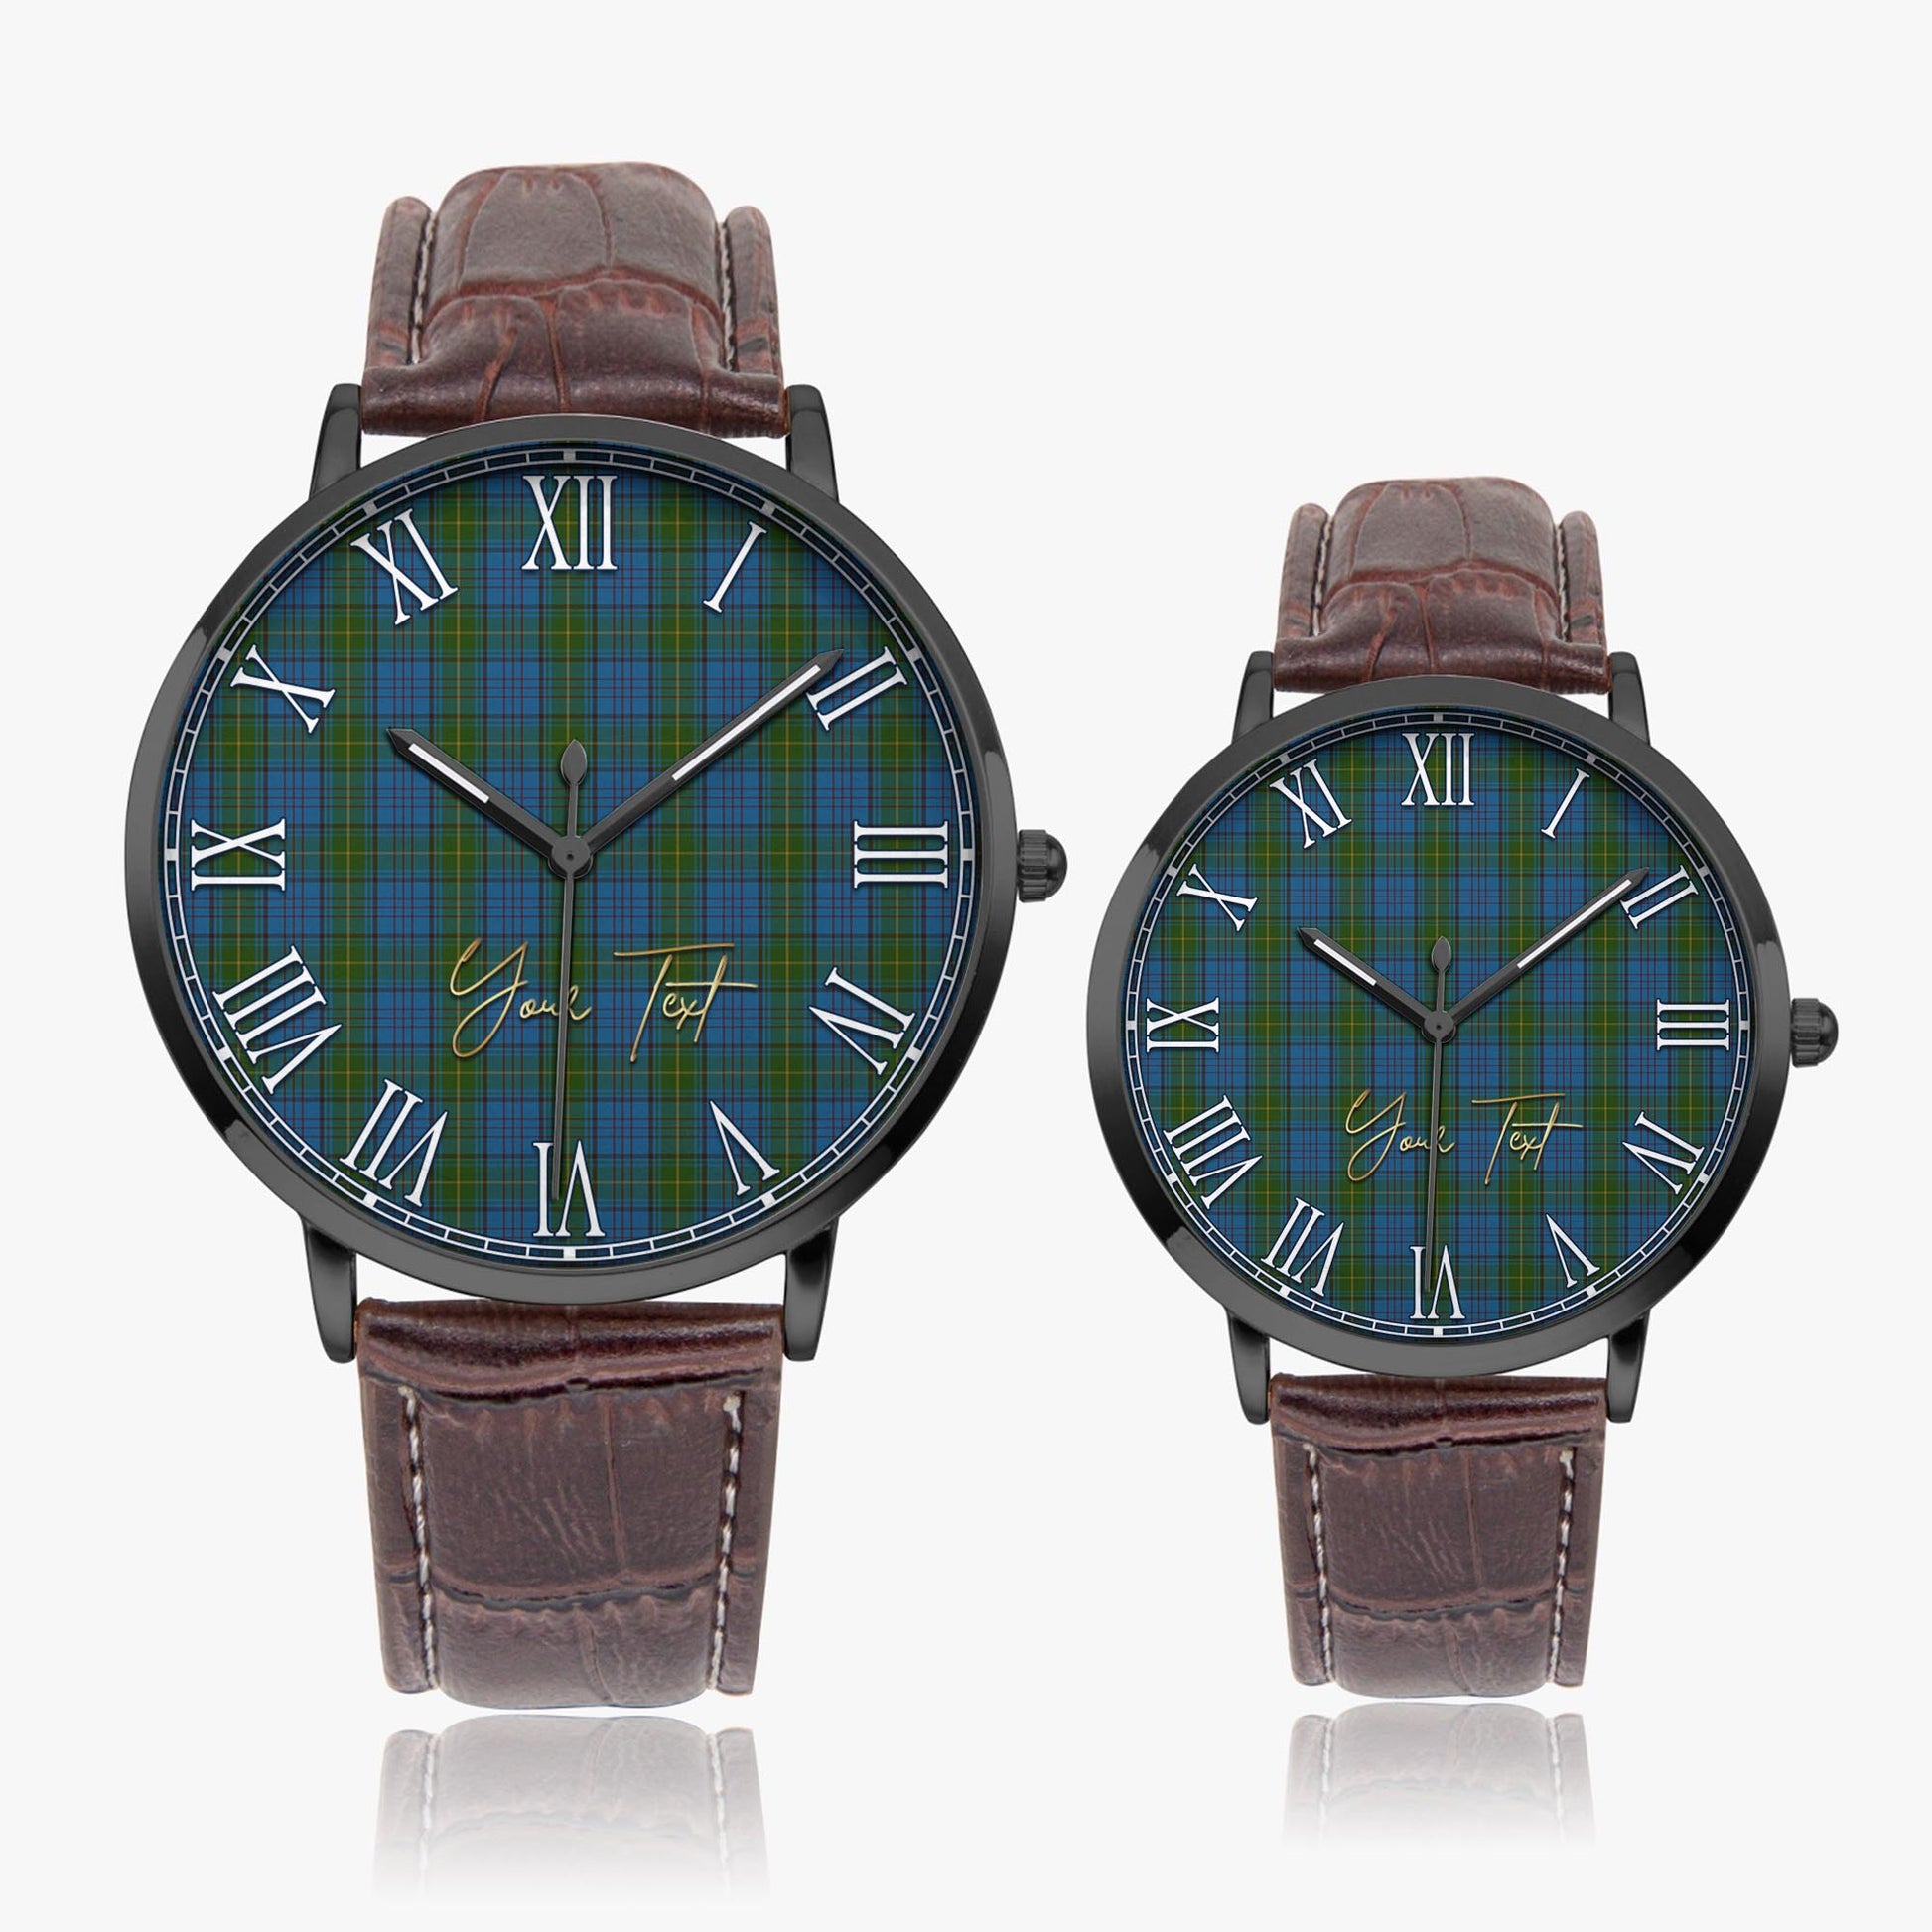 Donegal County Ireland Tartan Personalized Your Text Leather Trap Quartz Watch Ultra Thin Black Case With Brown Leather Strap - Tartanvibesclothing